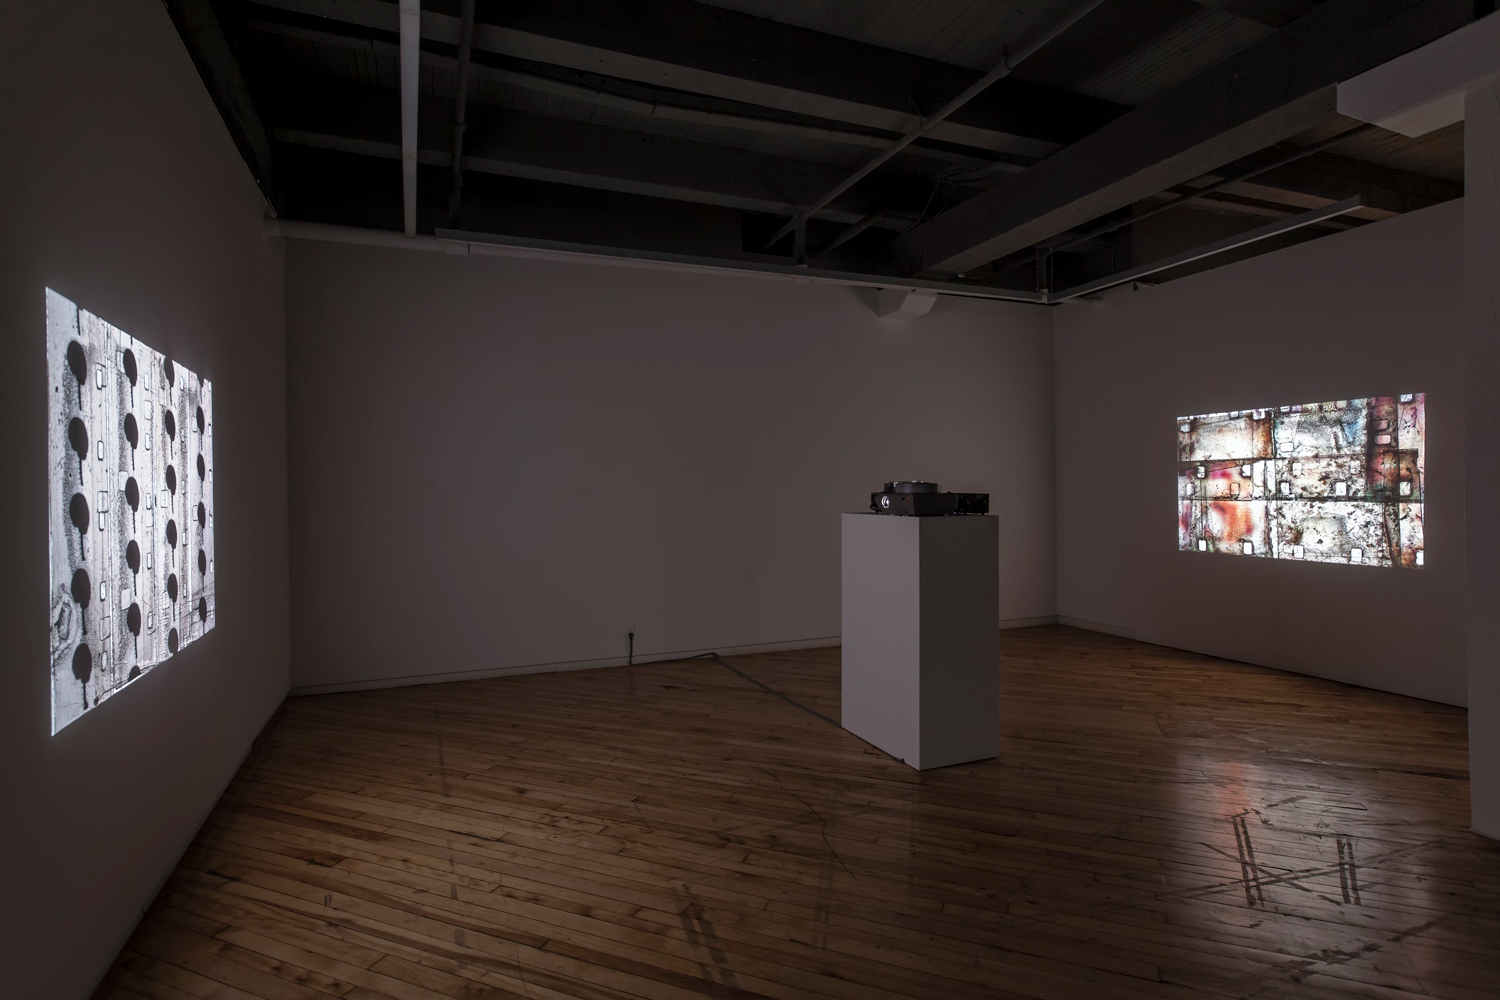     Installation view of Luther Price, Number 9 and Number 9 II, 2012

